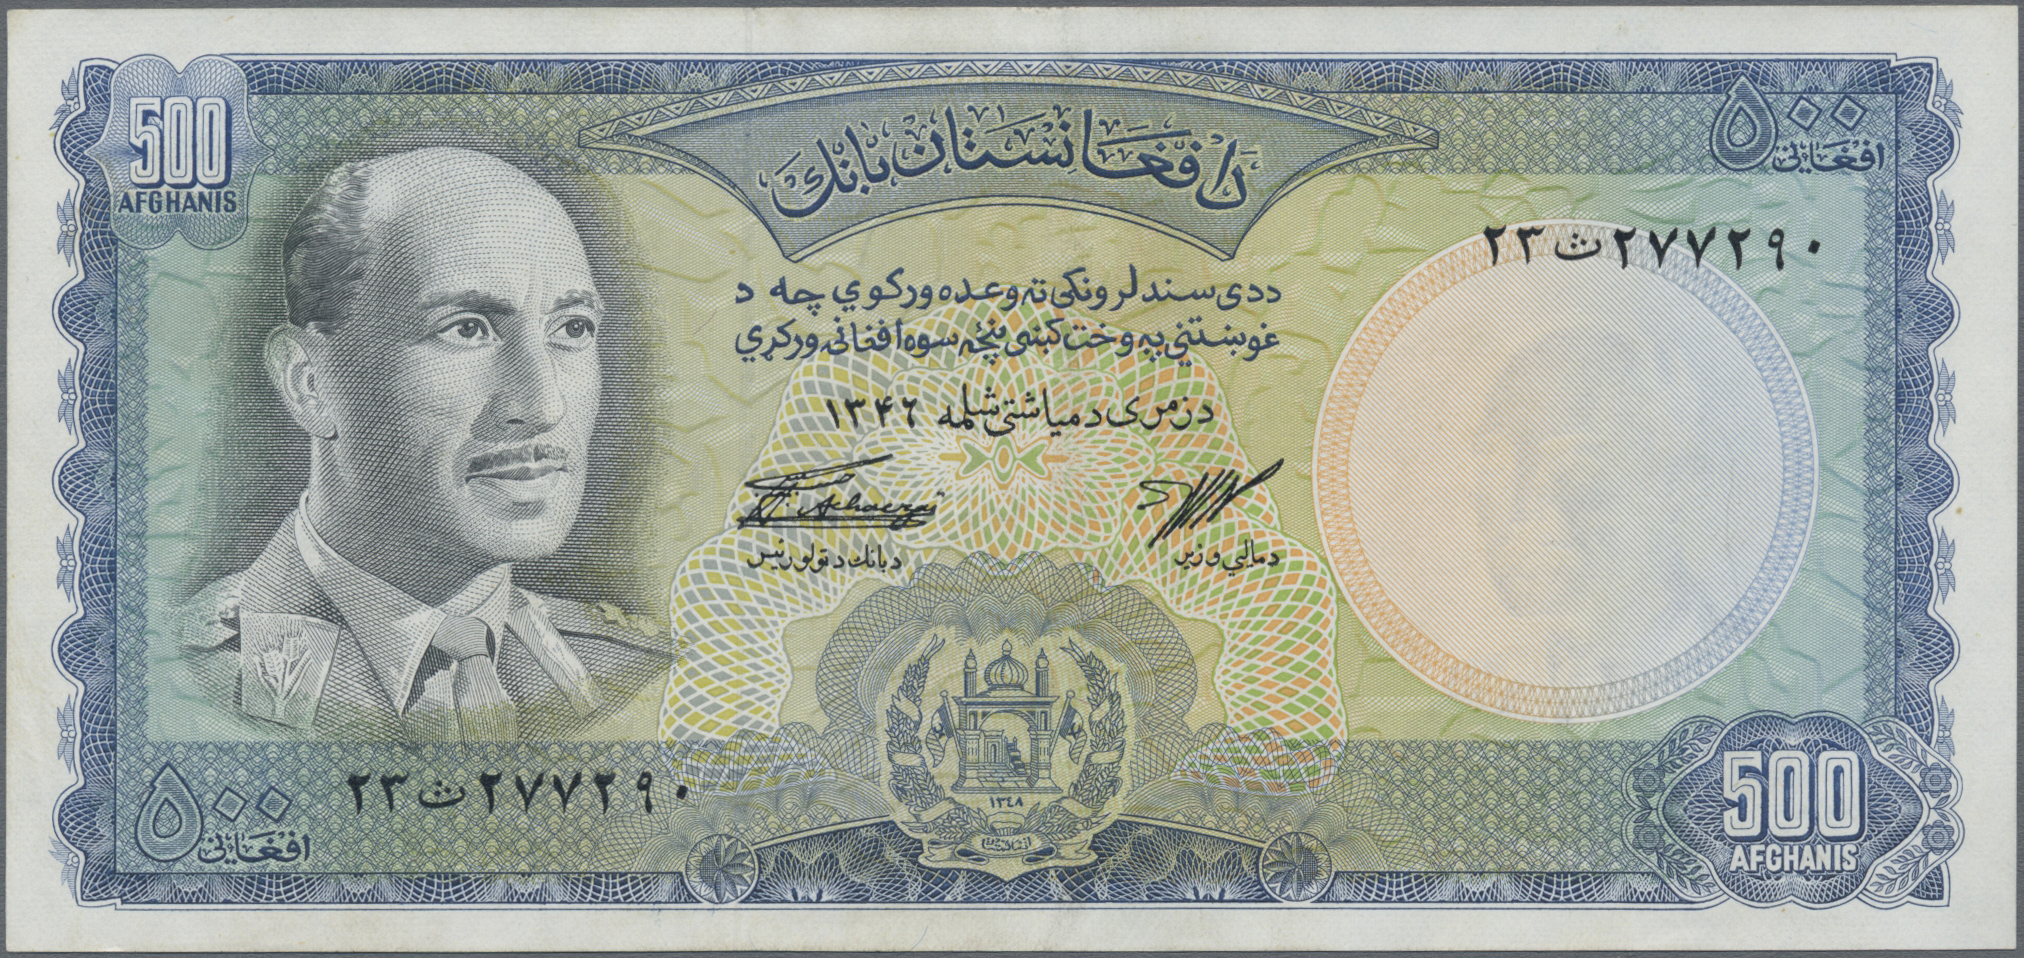 Lot 00005 - Afghanistan | Banknoten  -  Auktionshaus Christoph Gärtner GmbH & Co. KG 55th AUCTION - Day 1